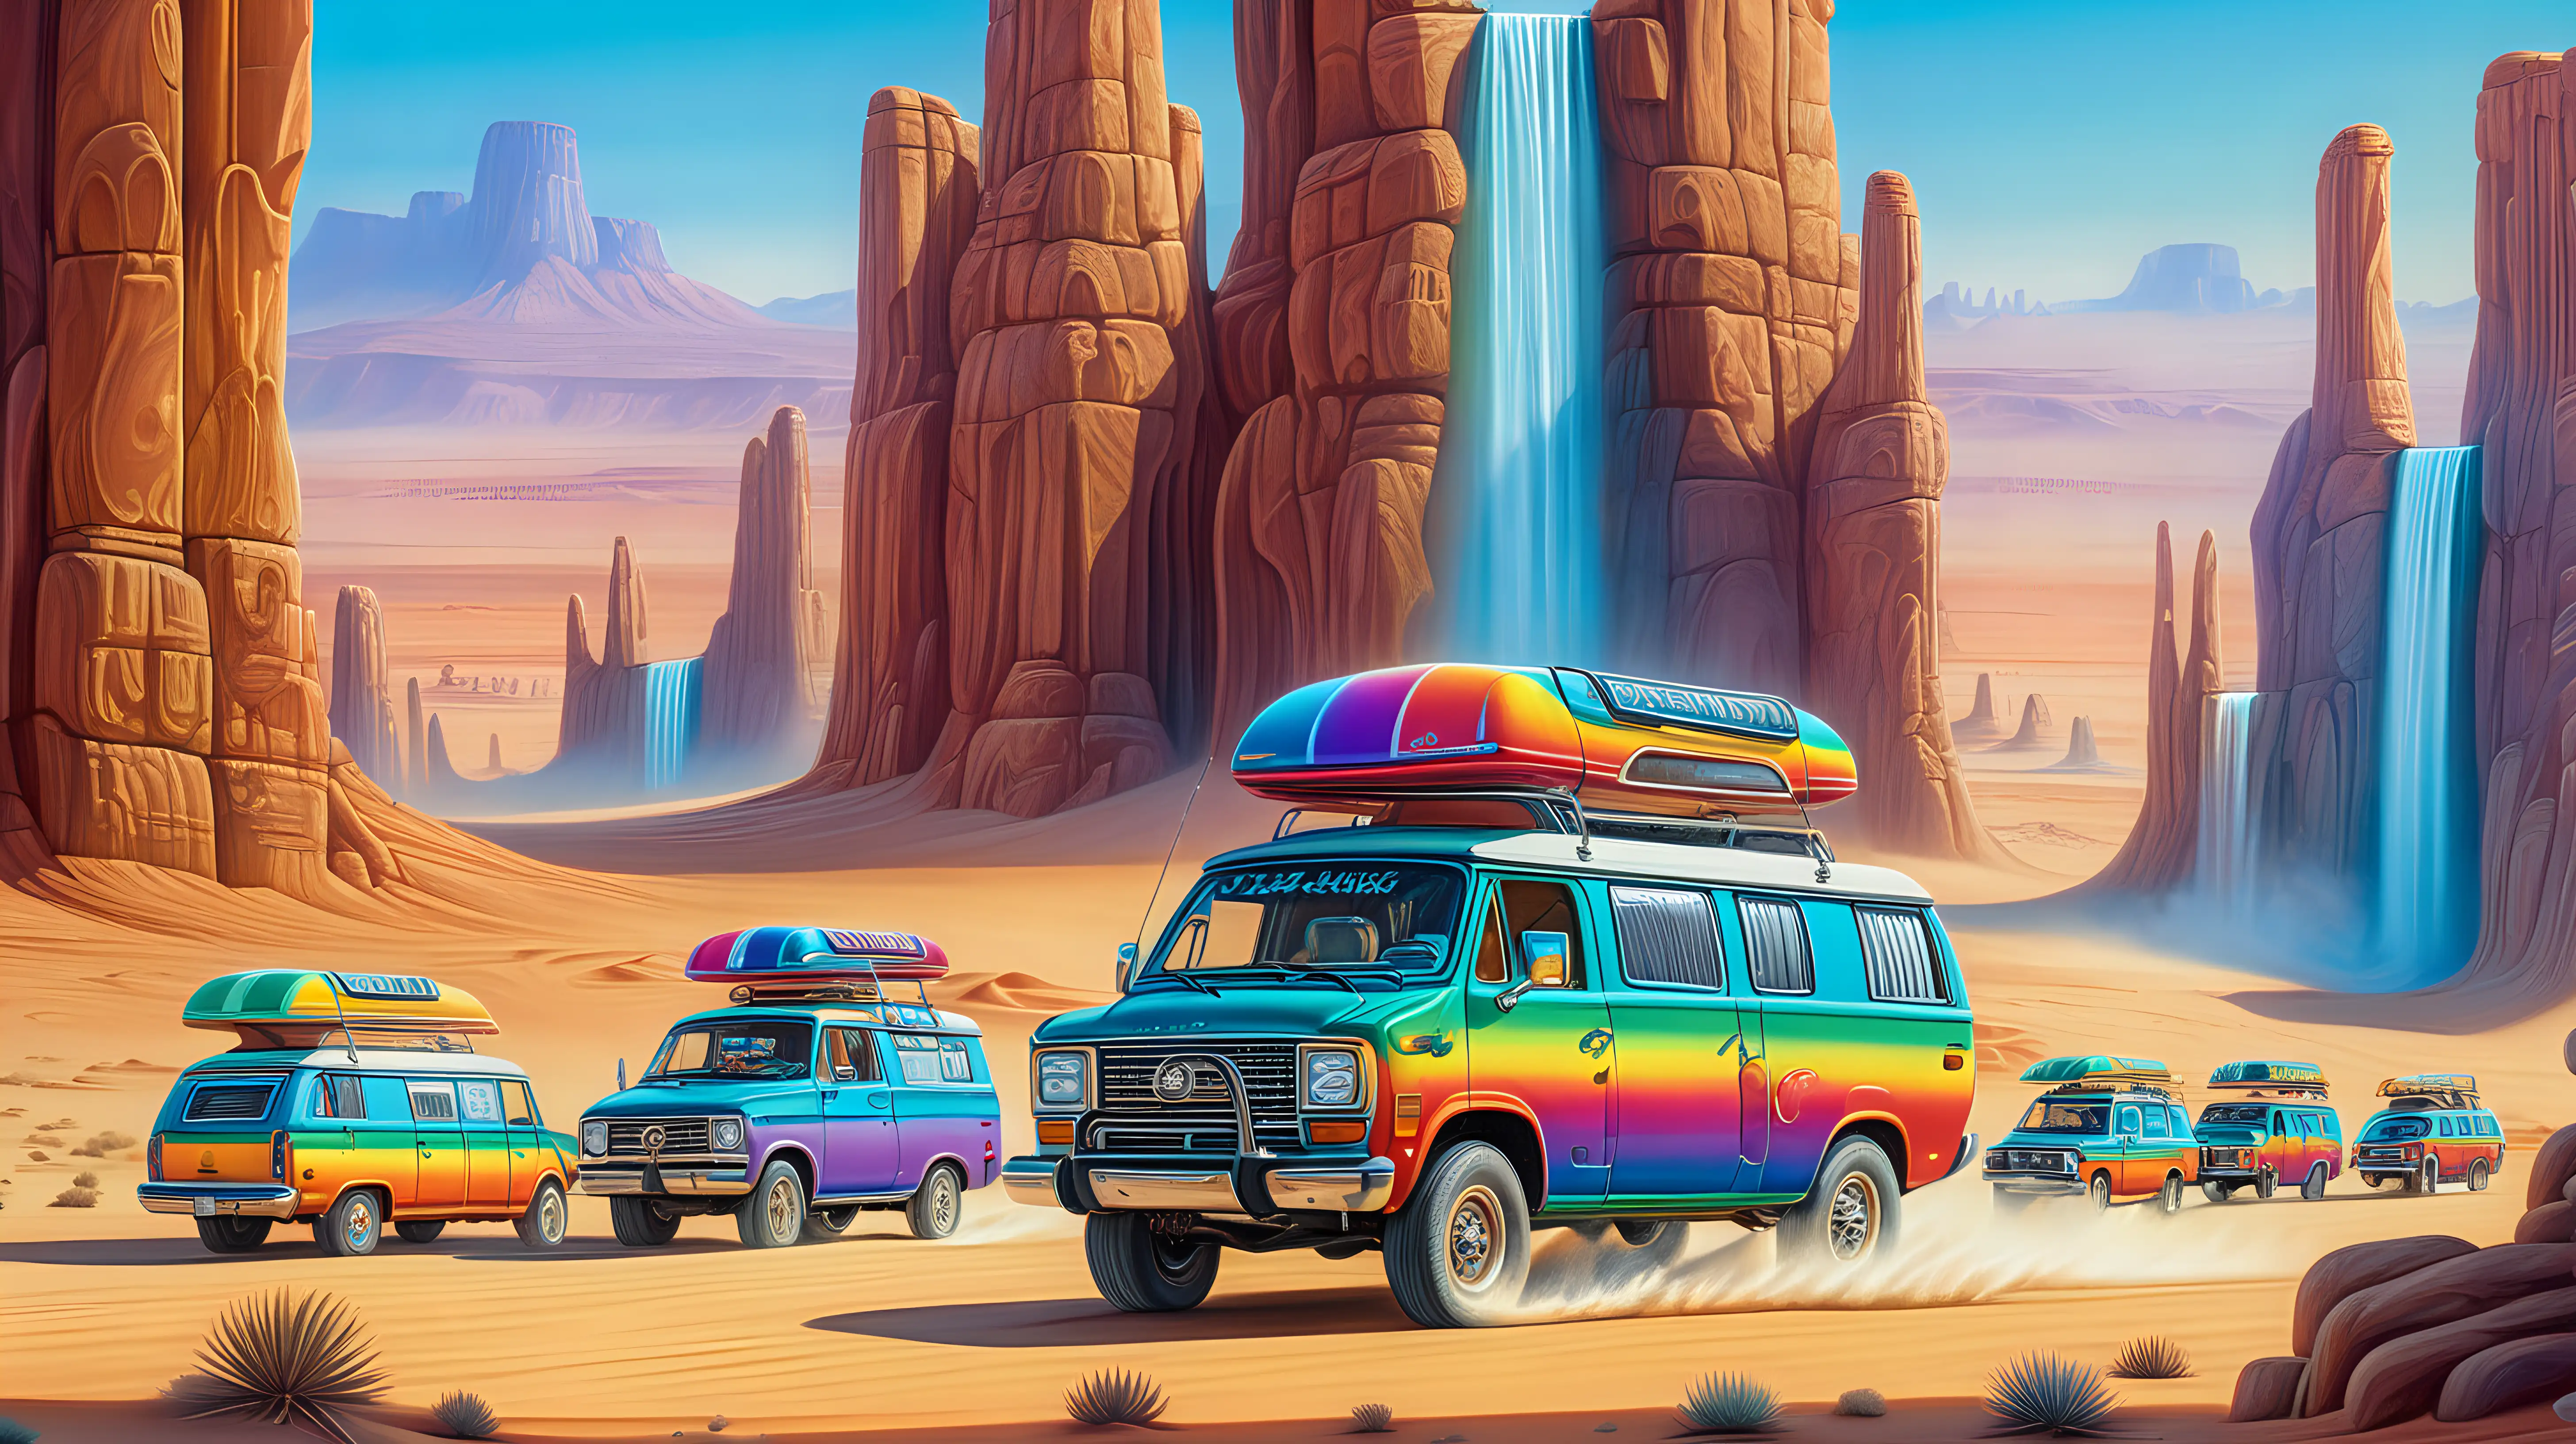 A caravan of vehicles traversing a desert landscape filled with towering pillars of light and cascading waterfalls of vibrant colors, creating a psychedelic journey through the sands.